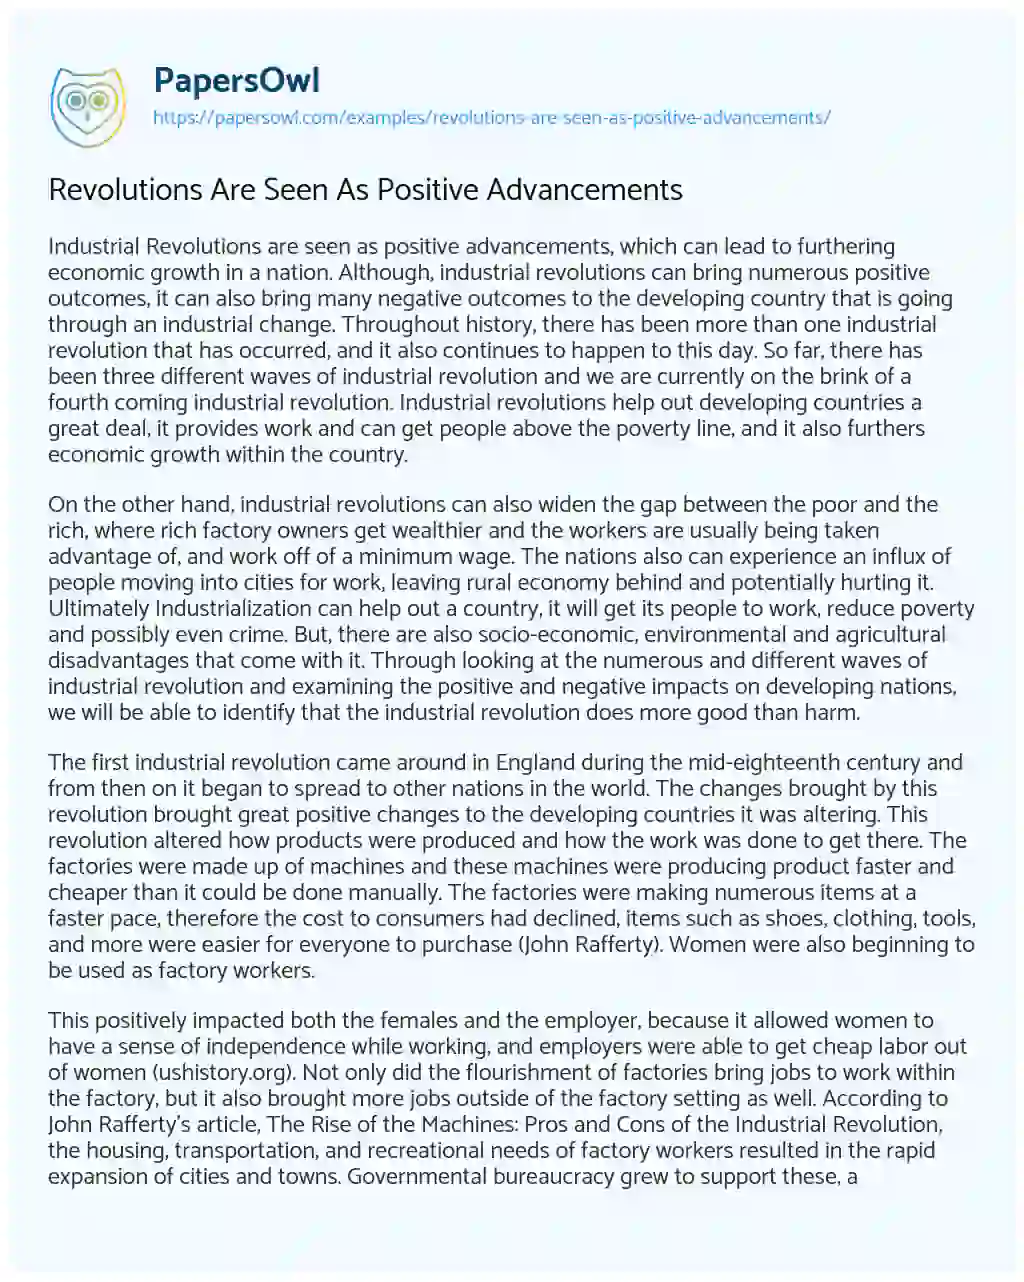 Revolutions are Seen as Positive Advancements essay